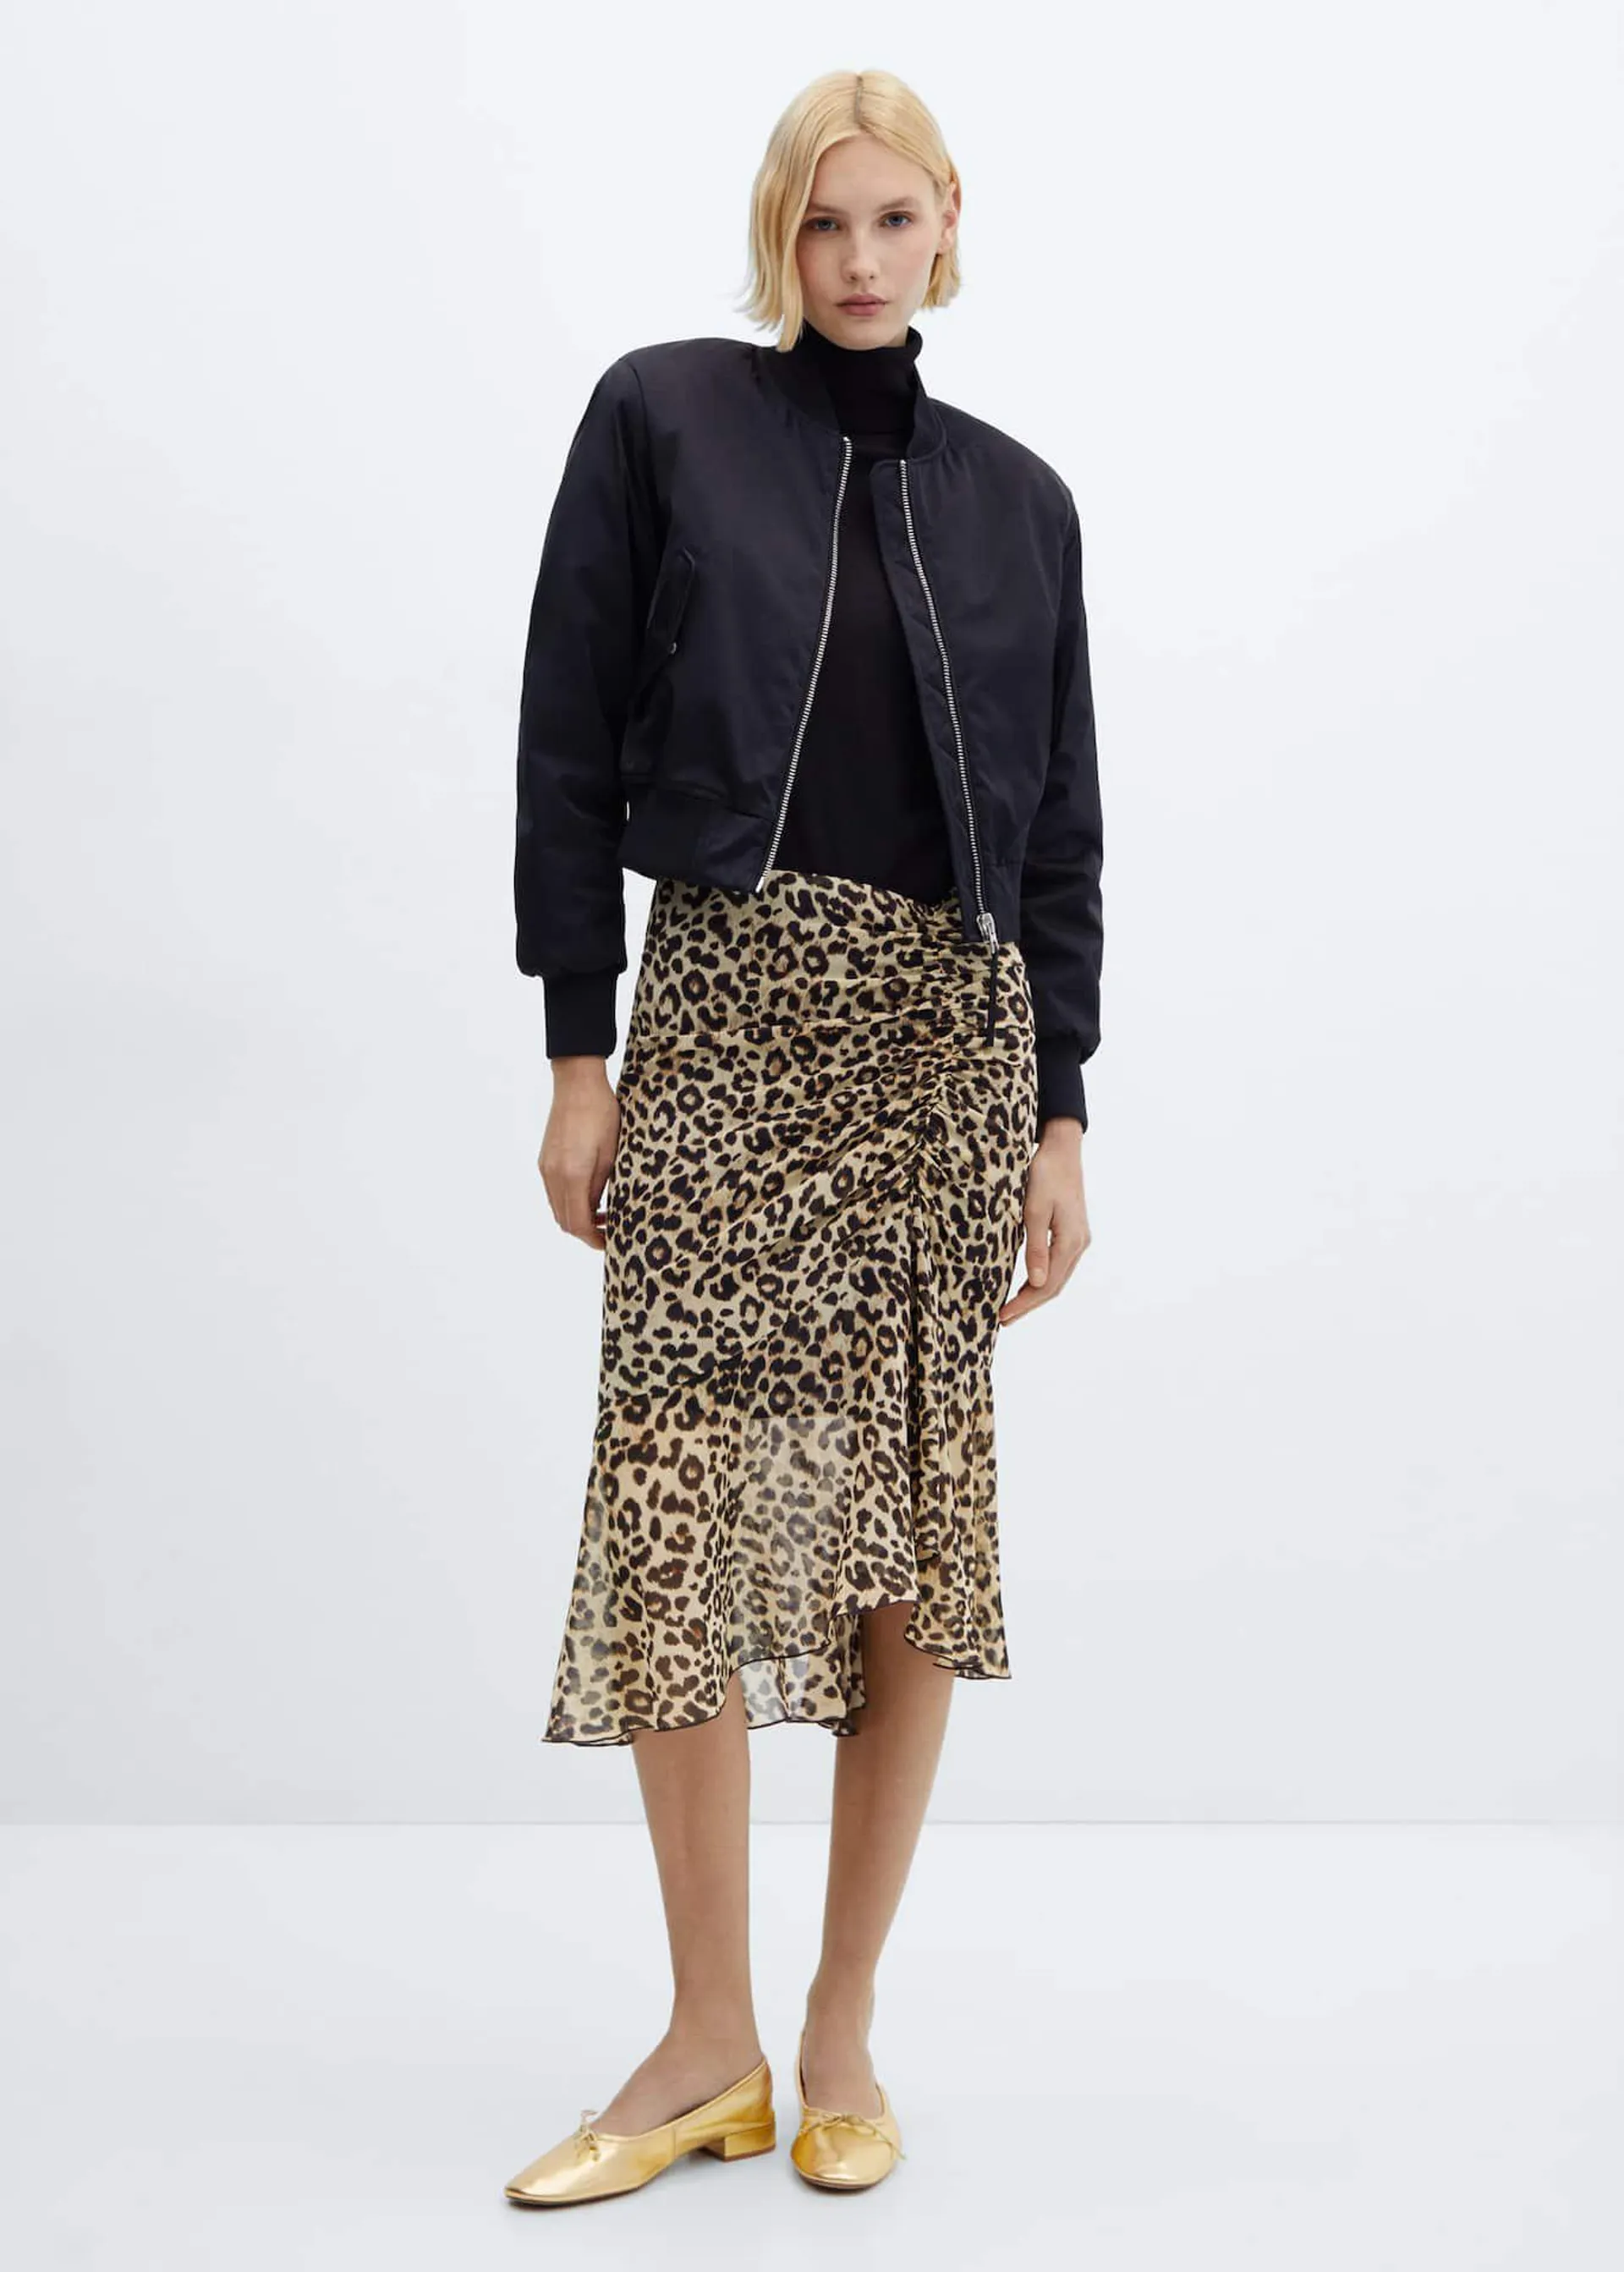 Leopard skirt with gathered detail